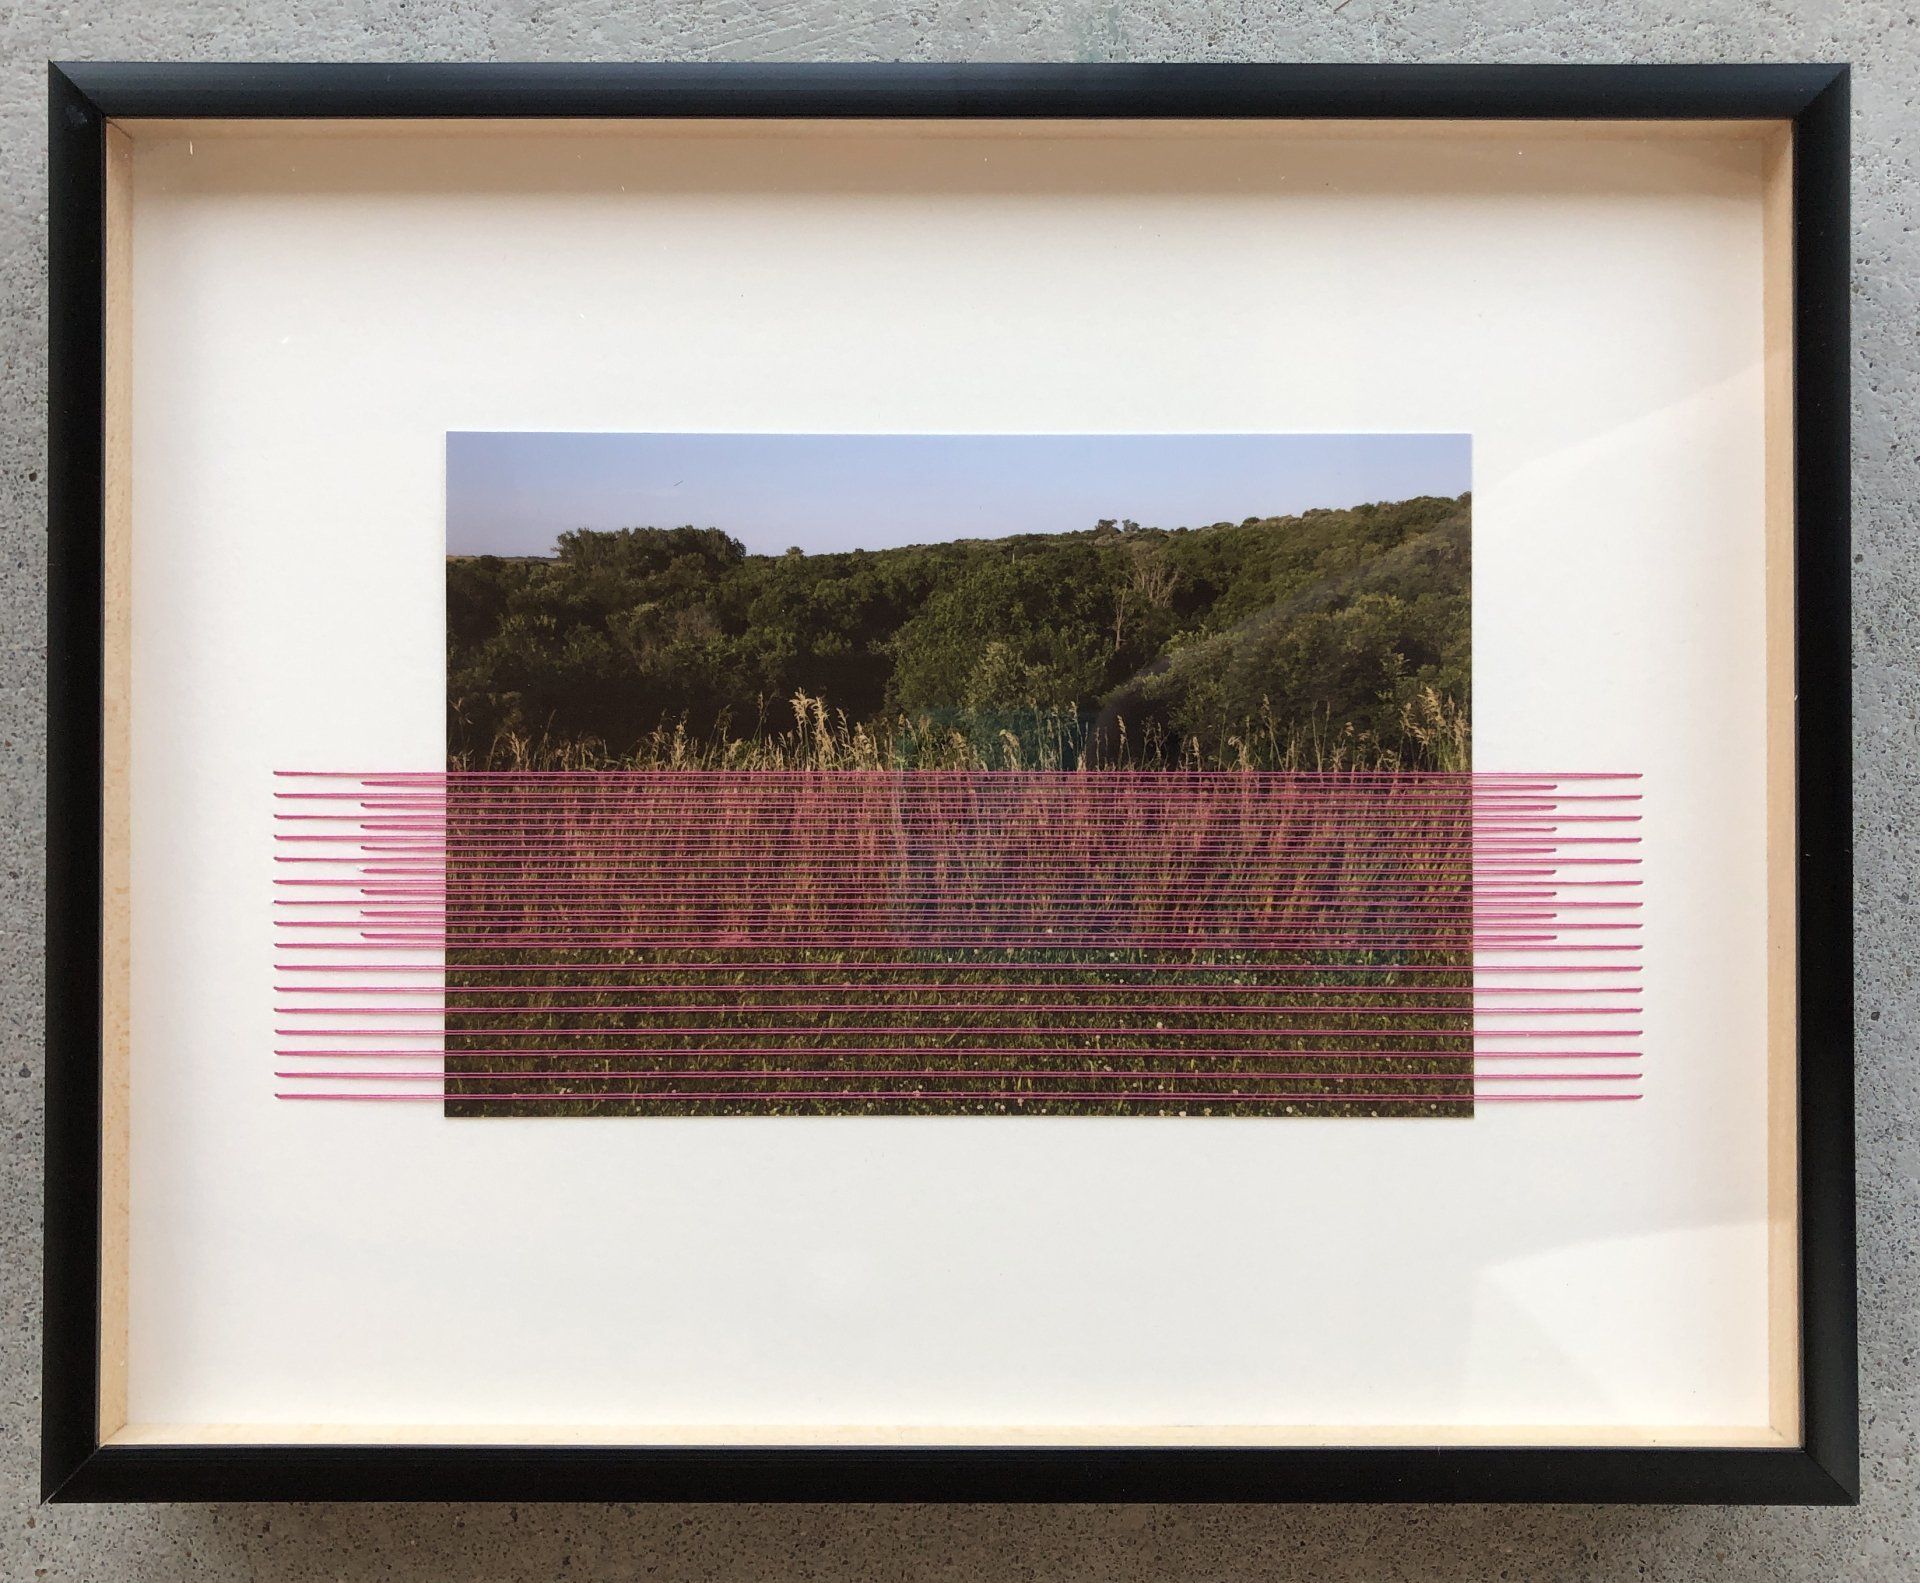 Olivia Valentine, Field Edging #15 (Viking Lake), (1/3) Photograph and thread on archival board, 8 x 10 in, $400